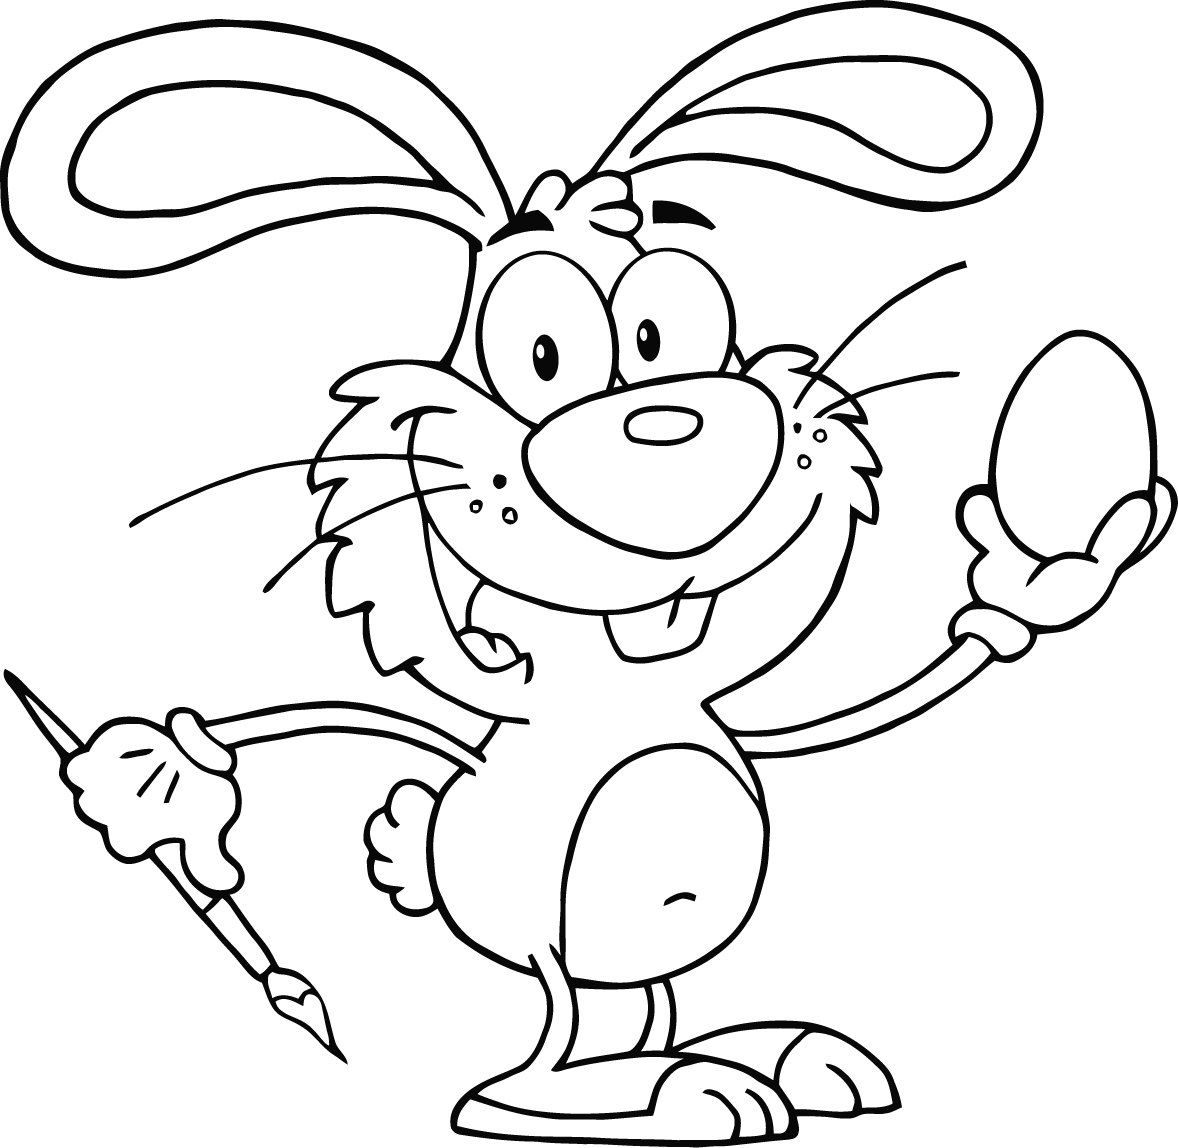 Easter Rabbit Outline 5 X 7 Machine Embroidery Design In 